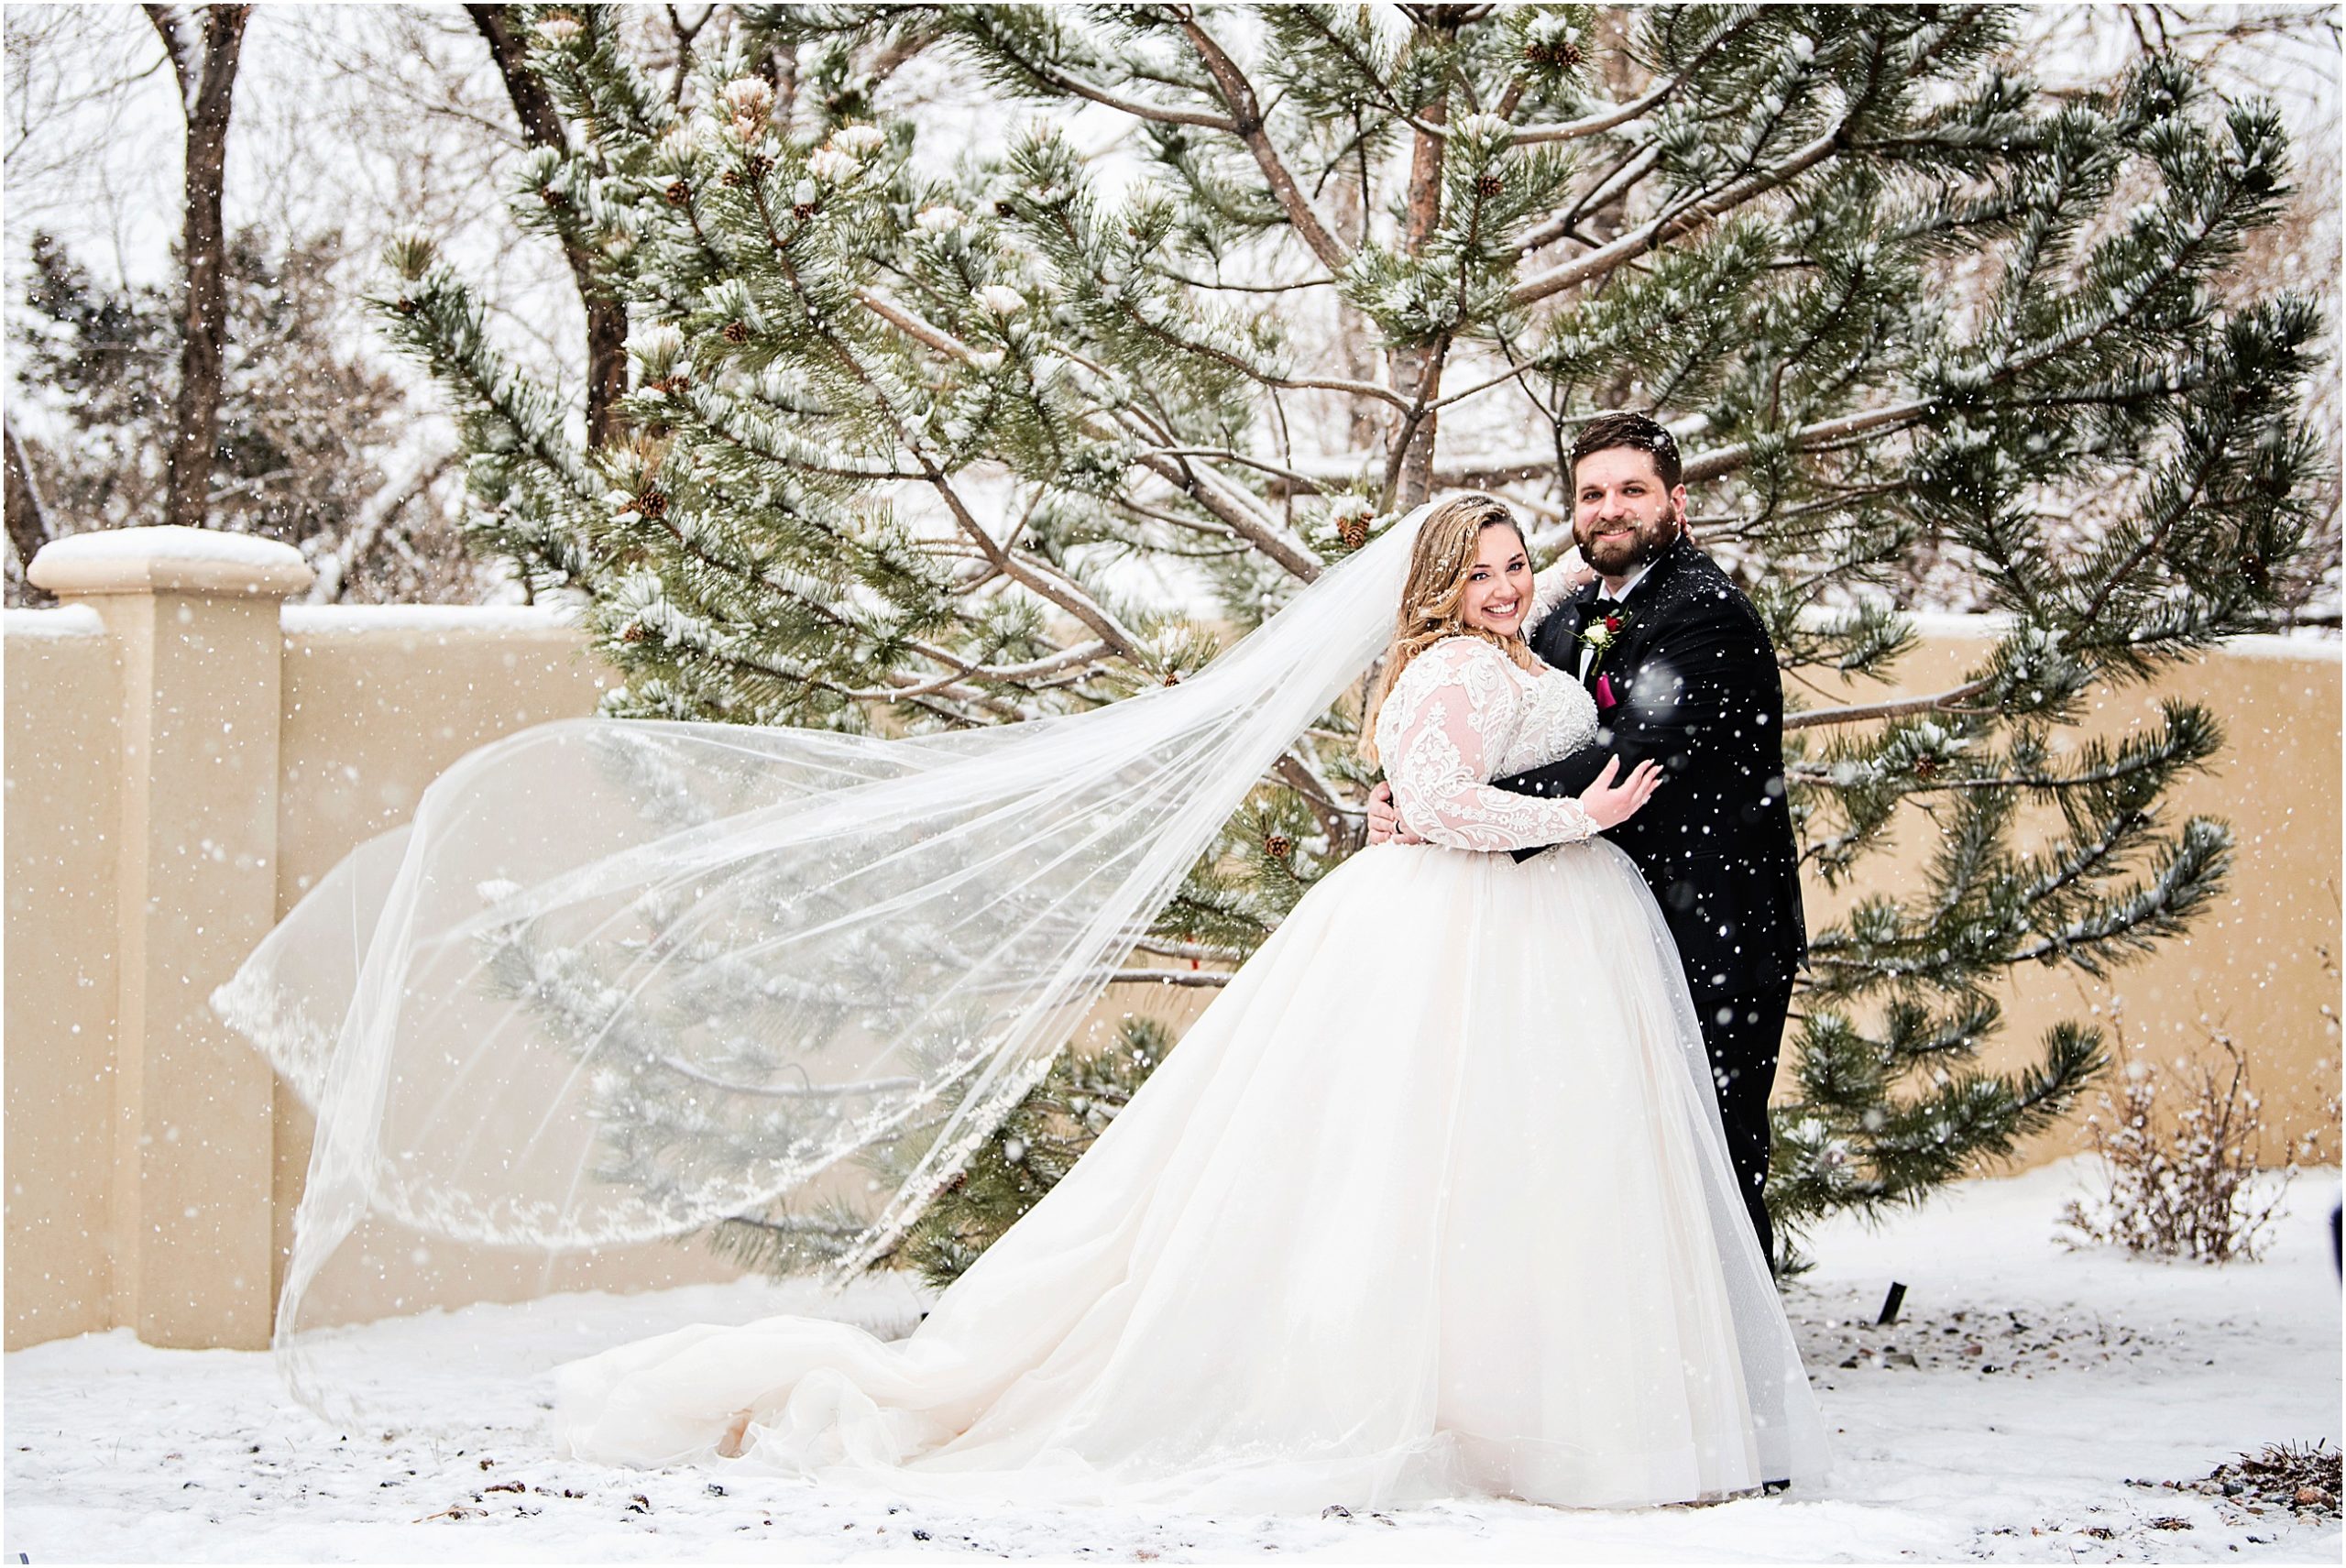 Brides veil flies while she is embracing her husband on their wedding day in the snowy colorado weather